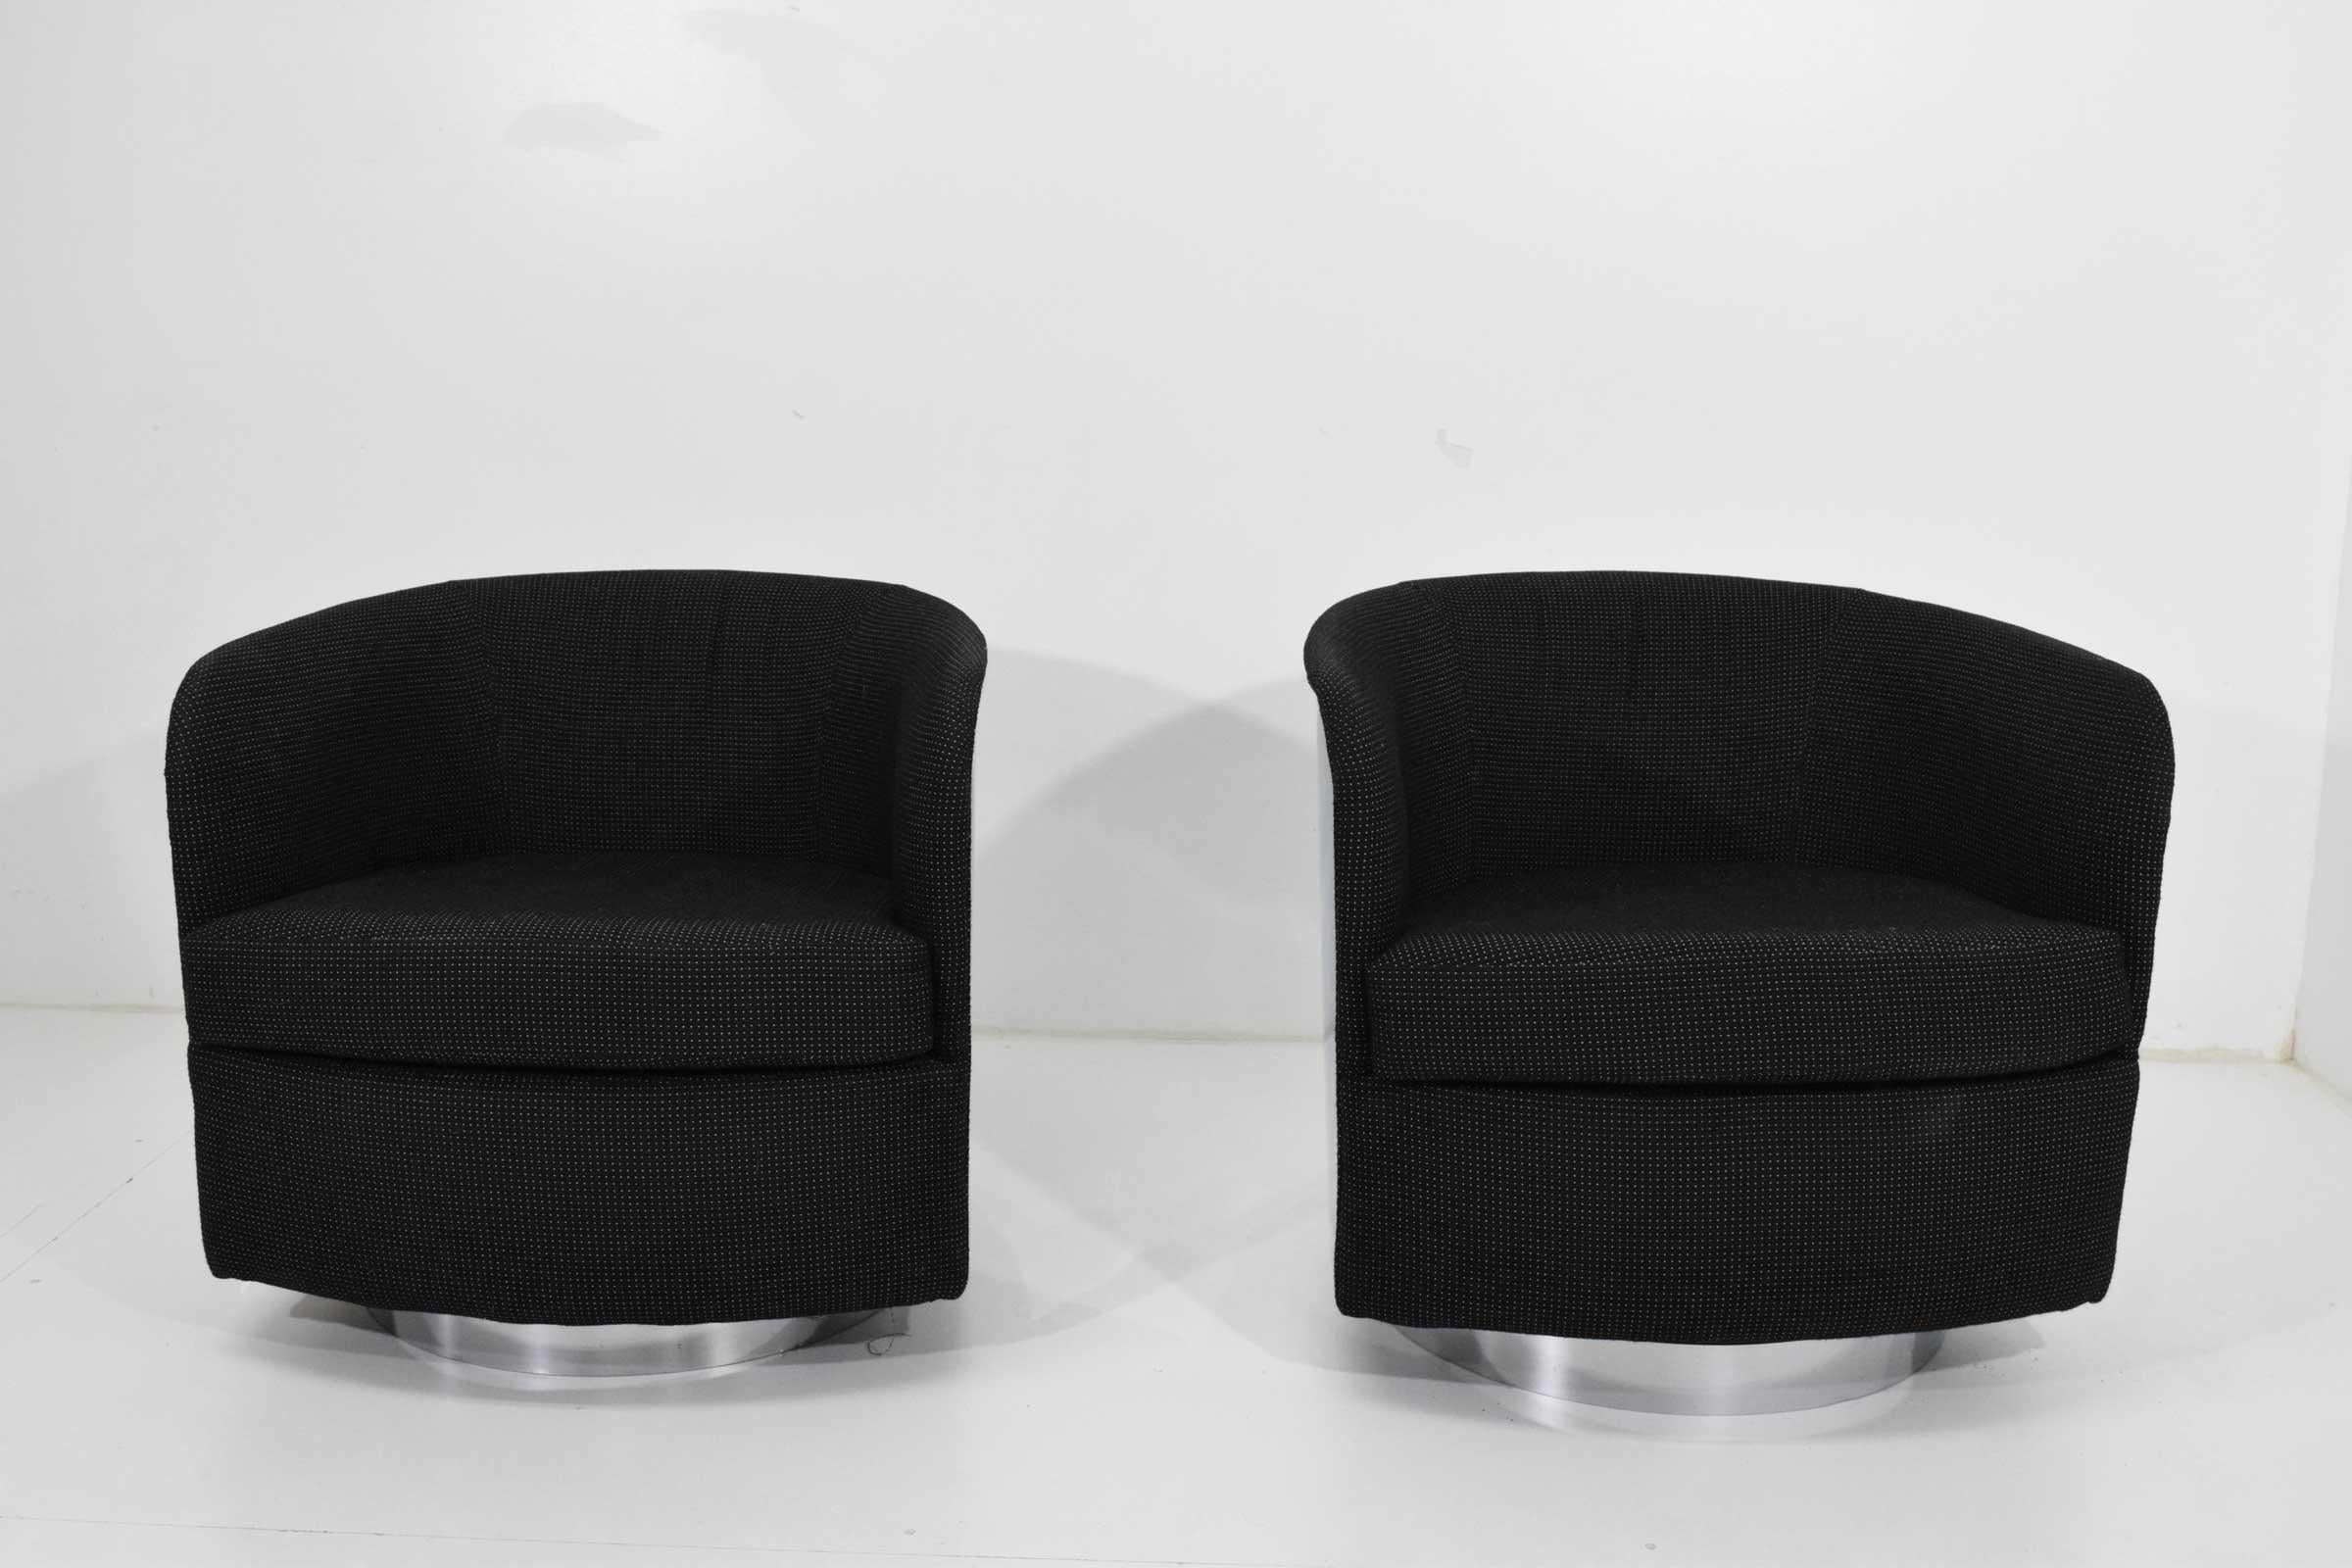 North American Chrome Case Swivel Chairs by Milo Baughman in Black Upholstery